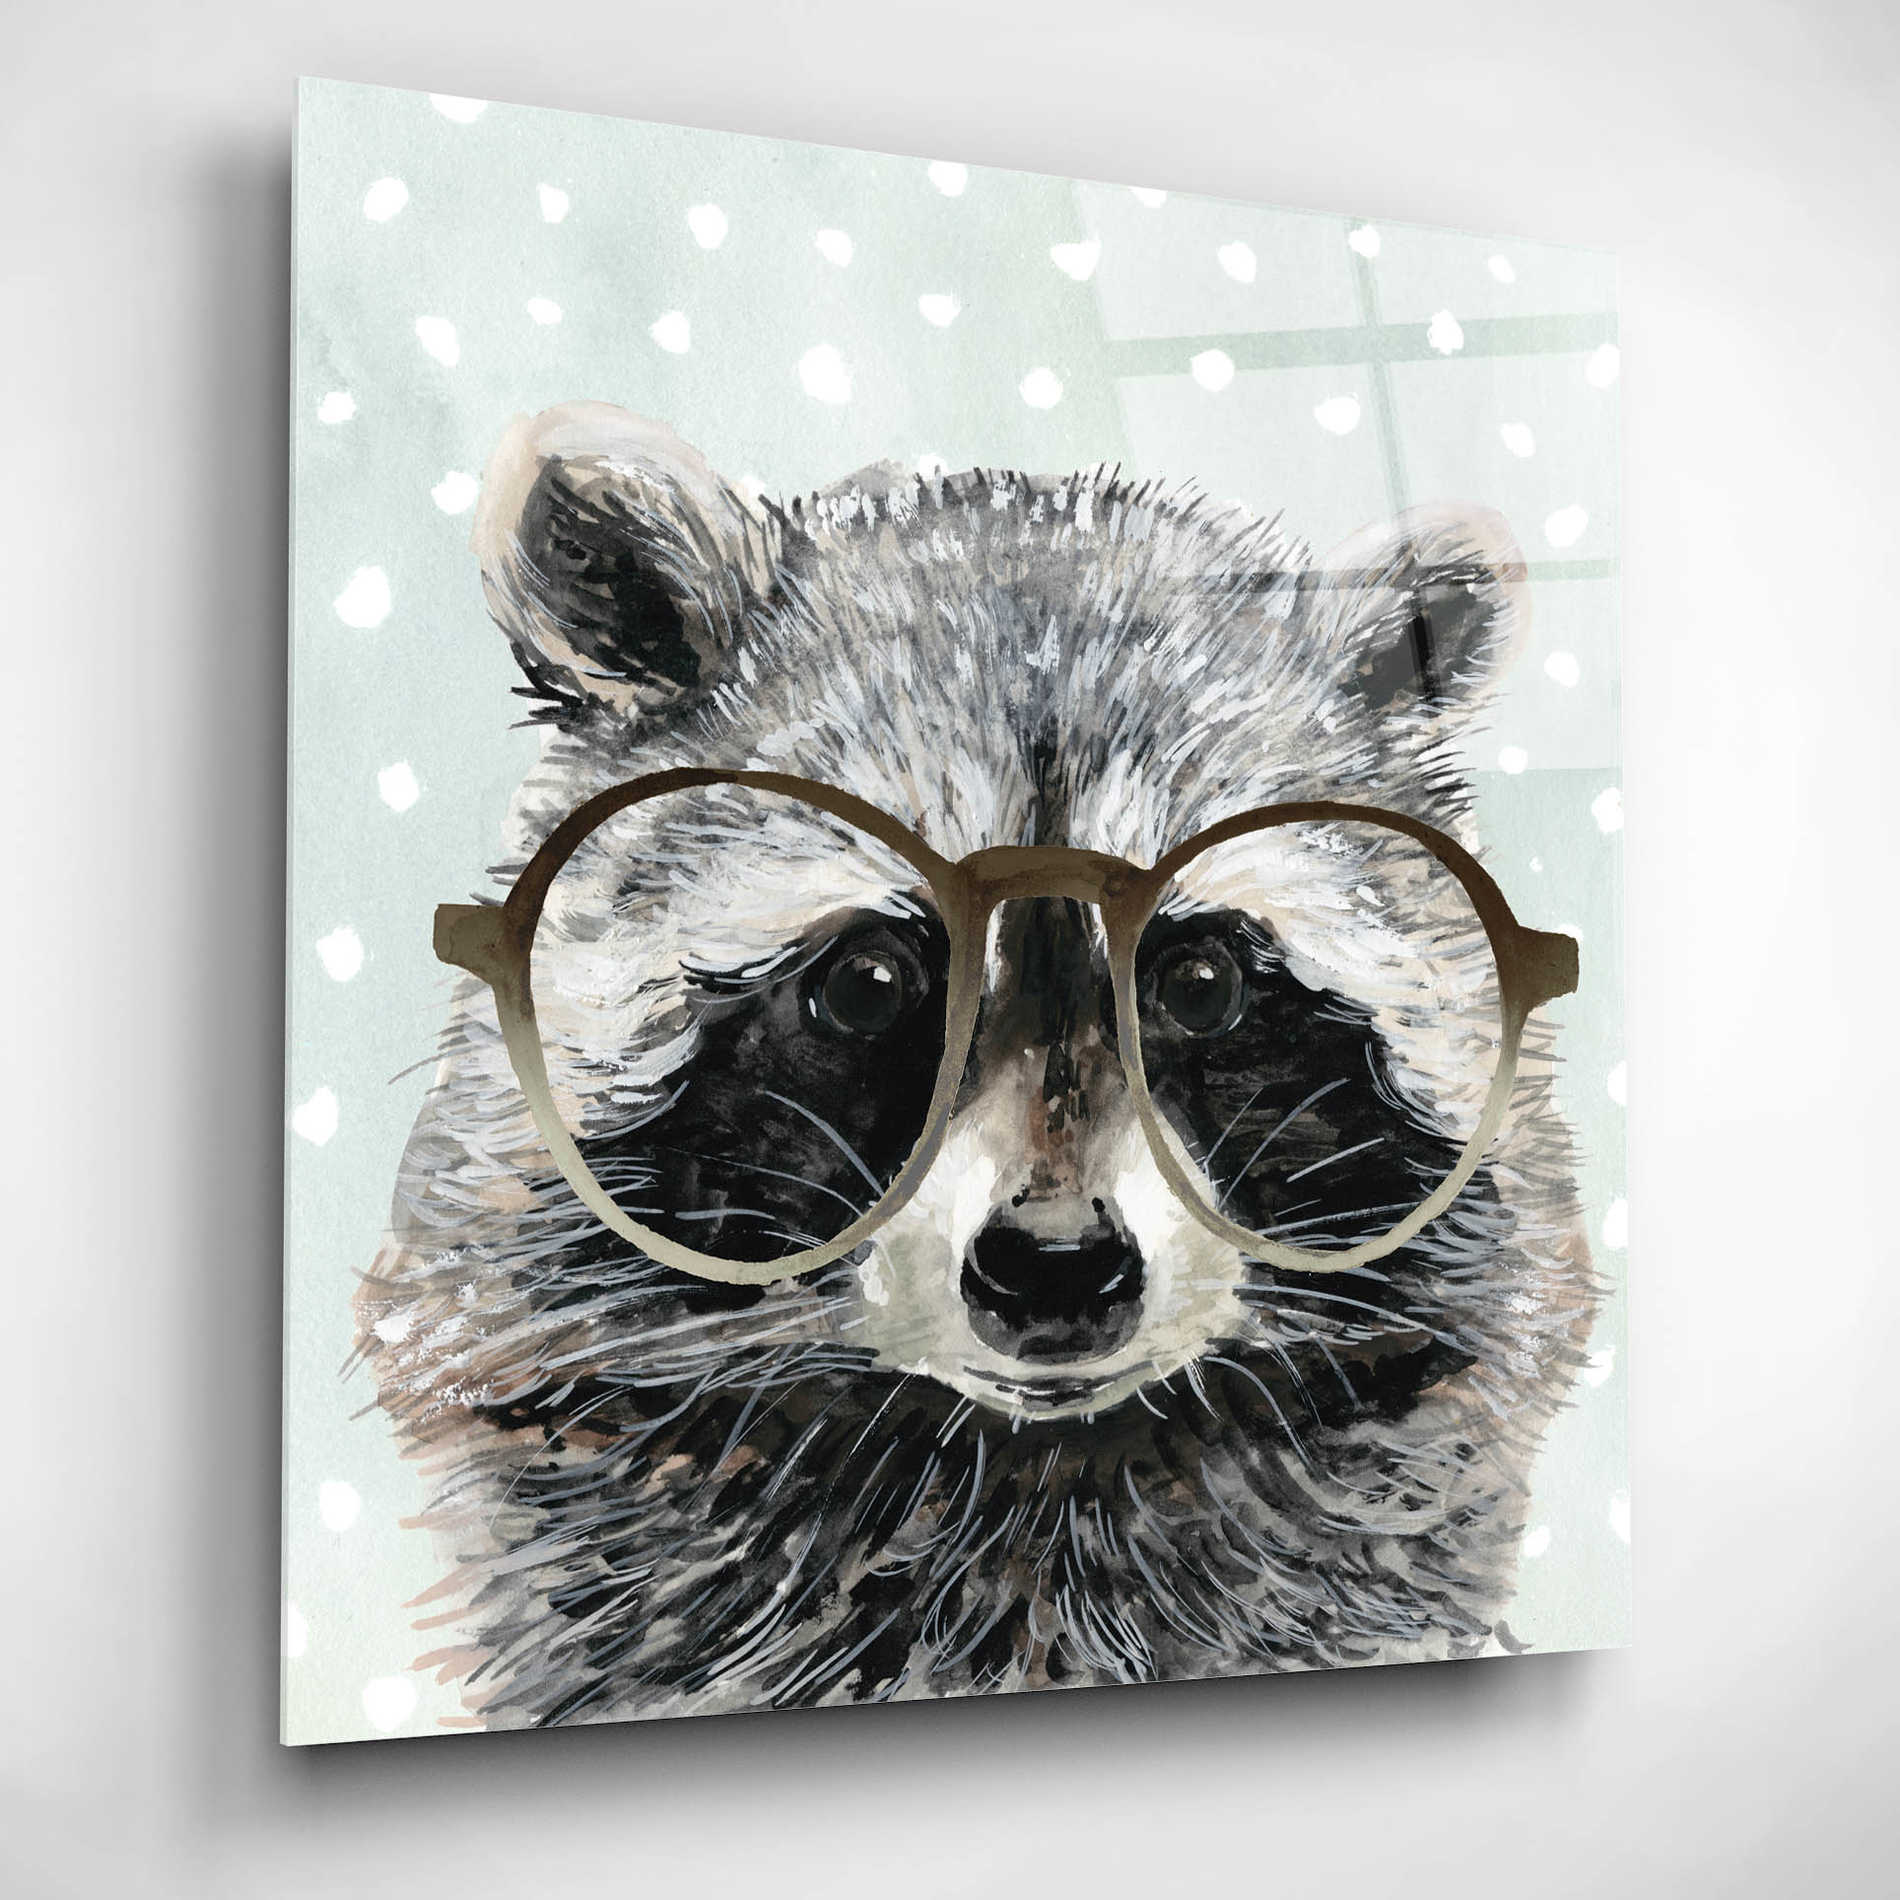 Epic Art 'Four-Eyed Forester IV' by Victoria Borges, Acrylic Glass Wall Art,12x12